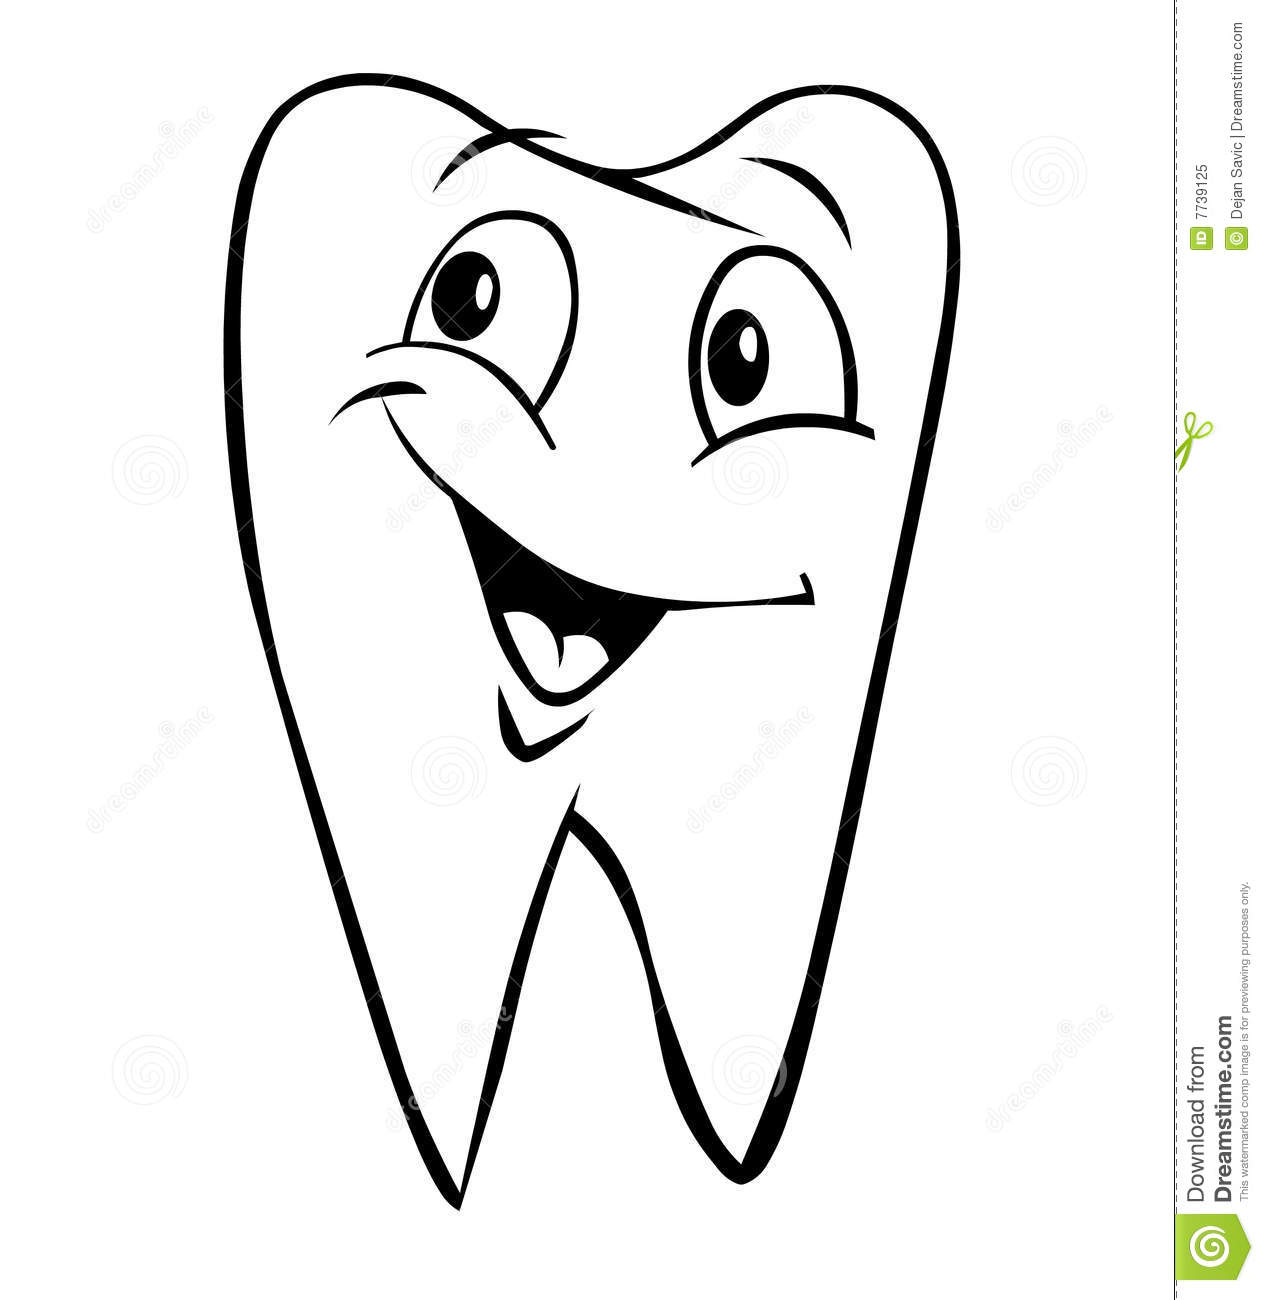 Smiling Tooth Royalty Free Stock Photo   Image  7739125